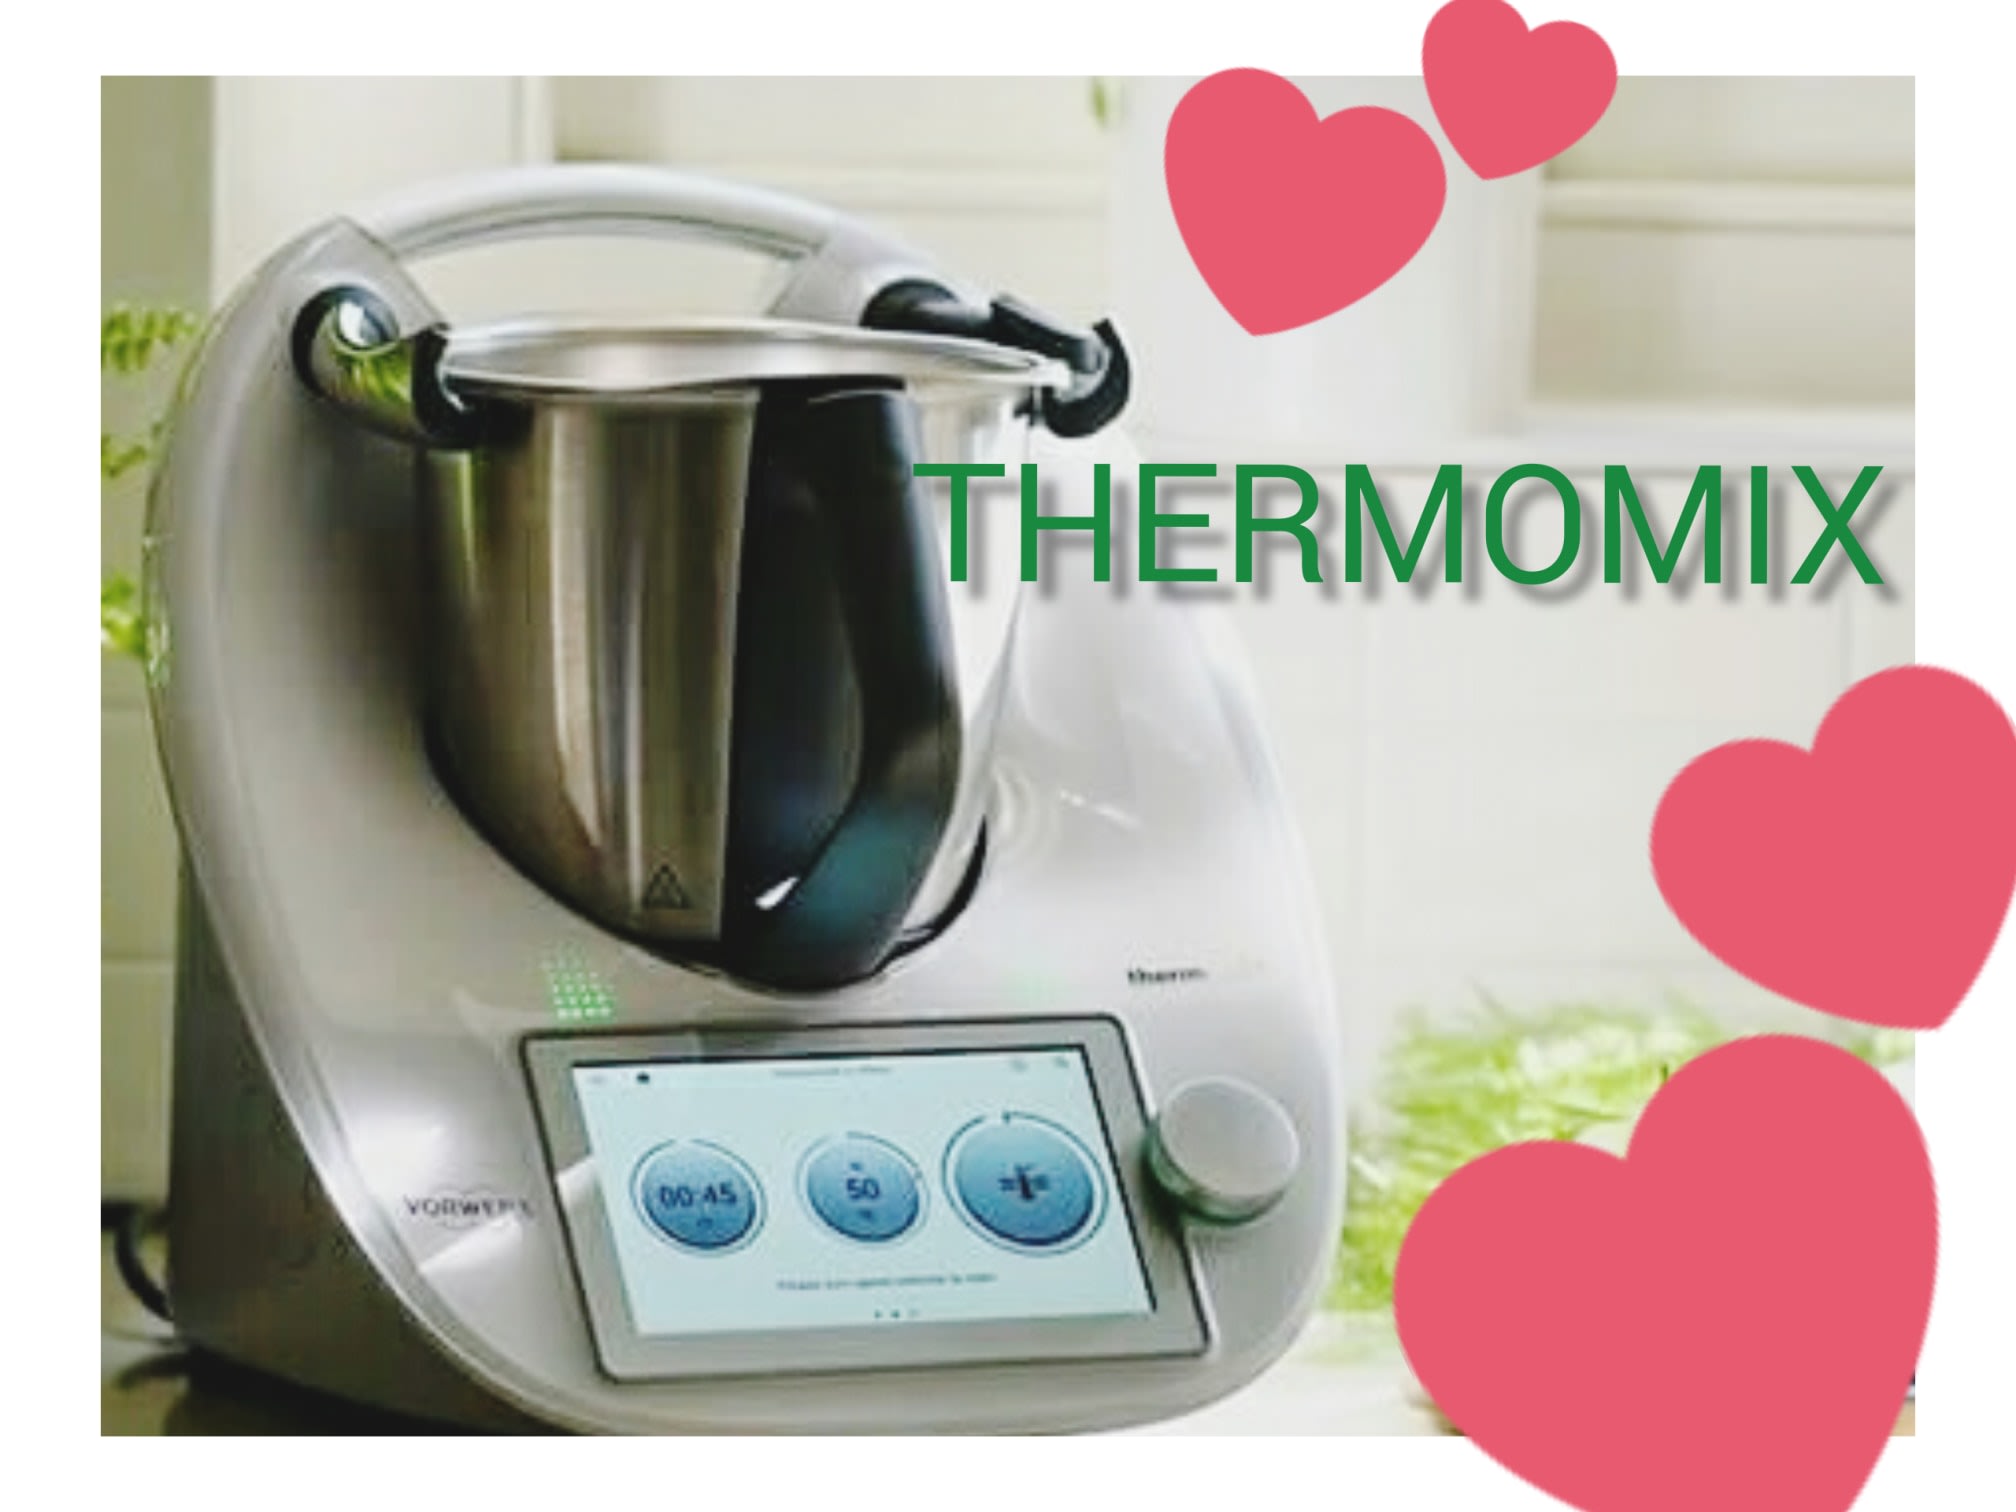 Images Carmen Thermomix Friends